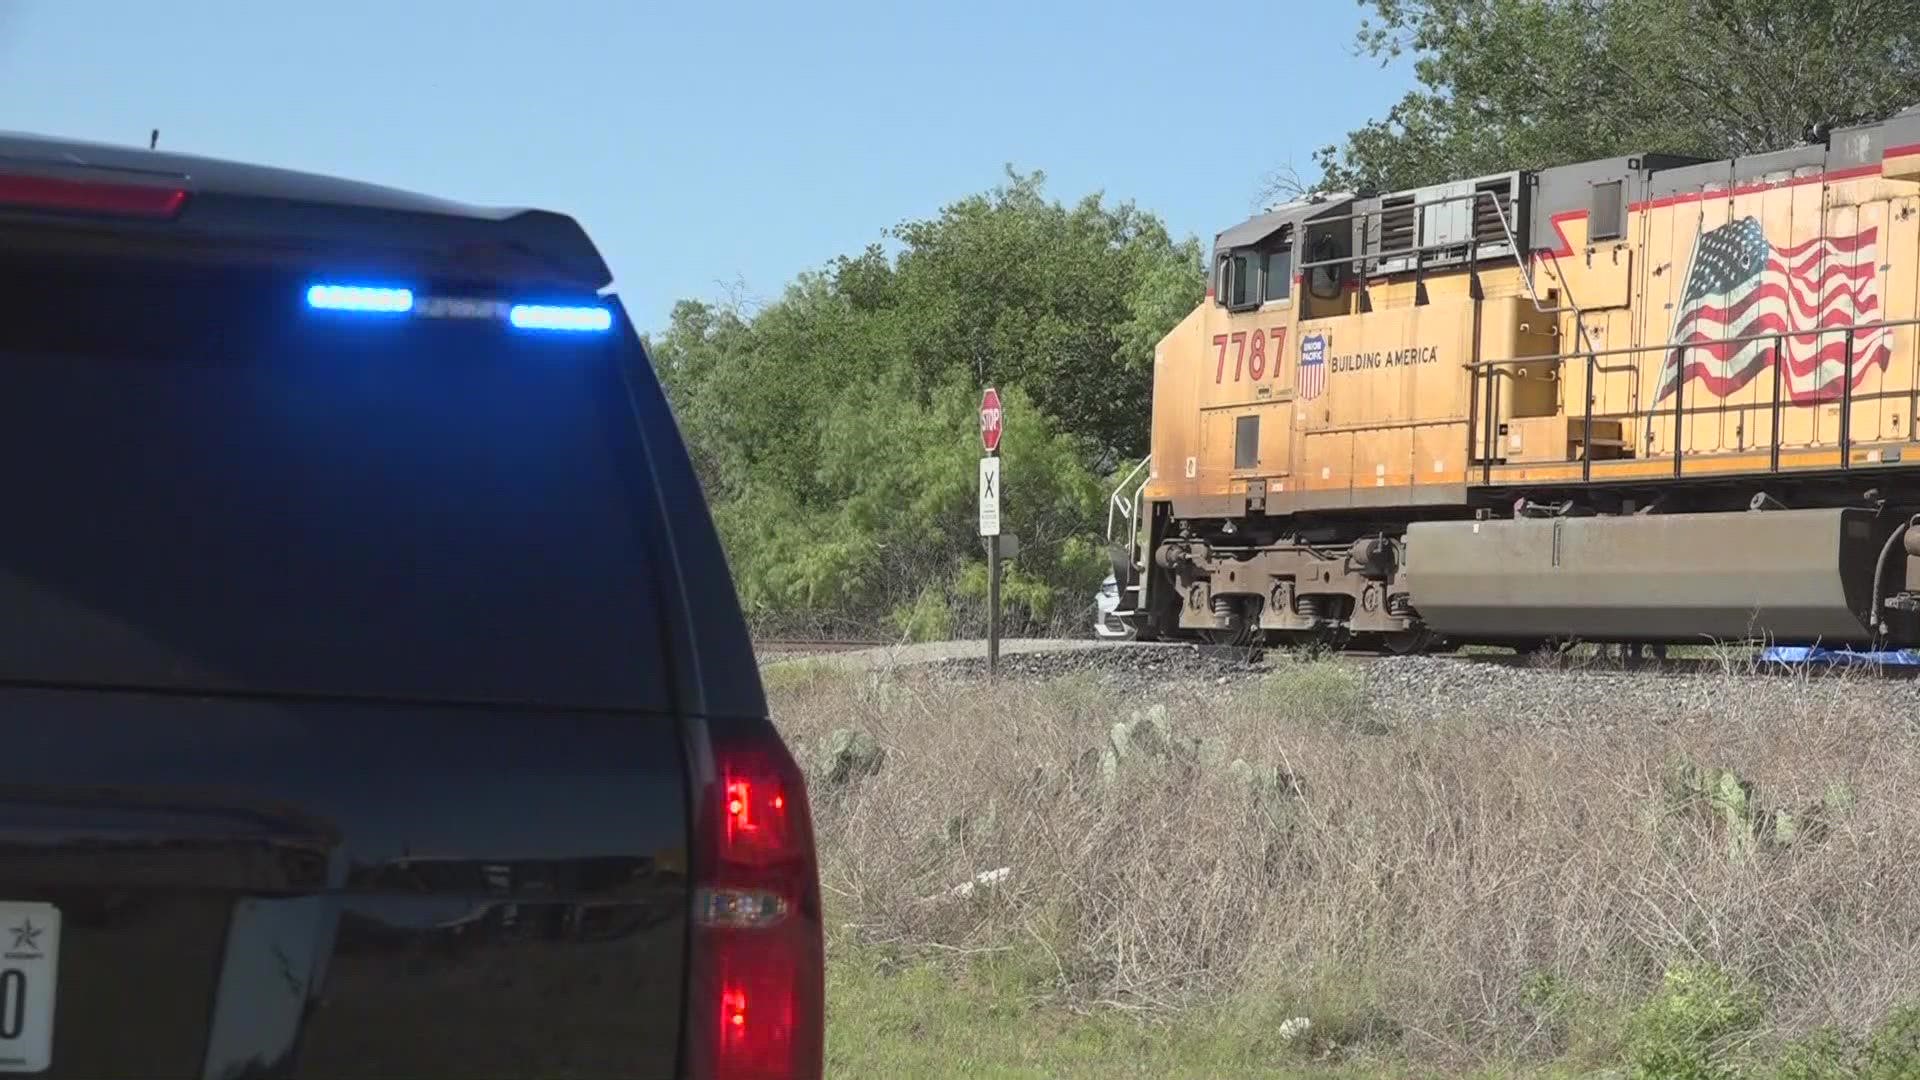 A southbound train collided with a vehicle around 7:15 a.m. on Friday.